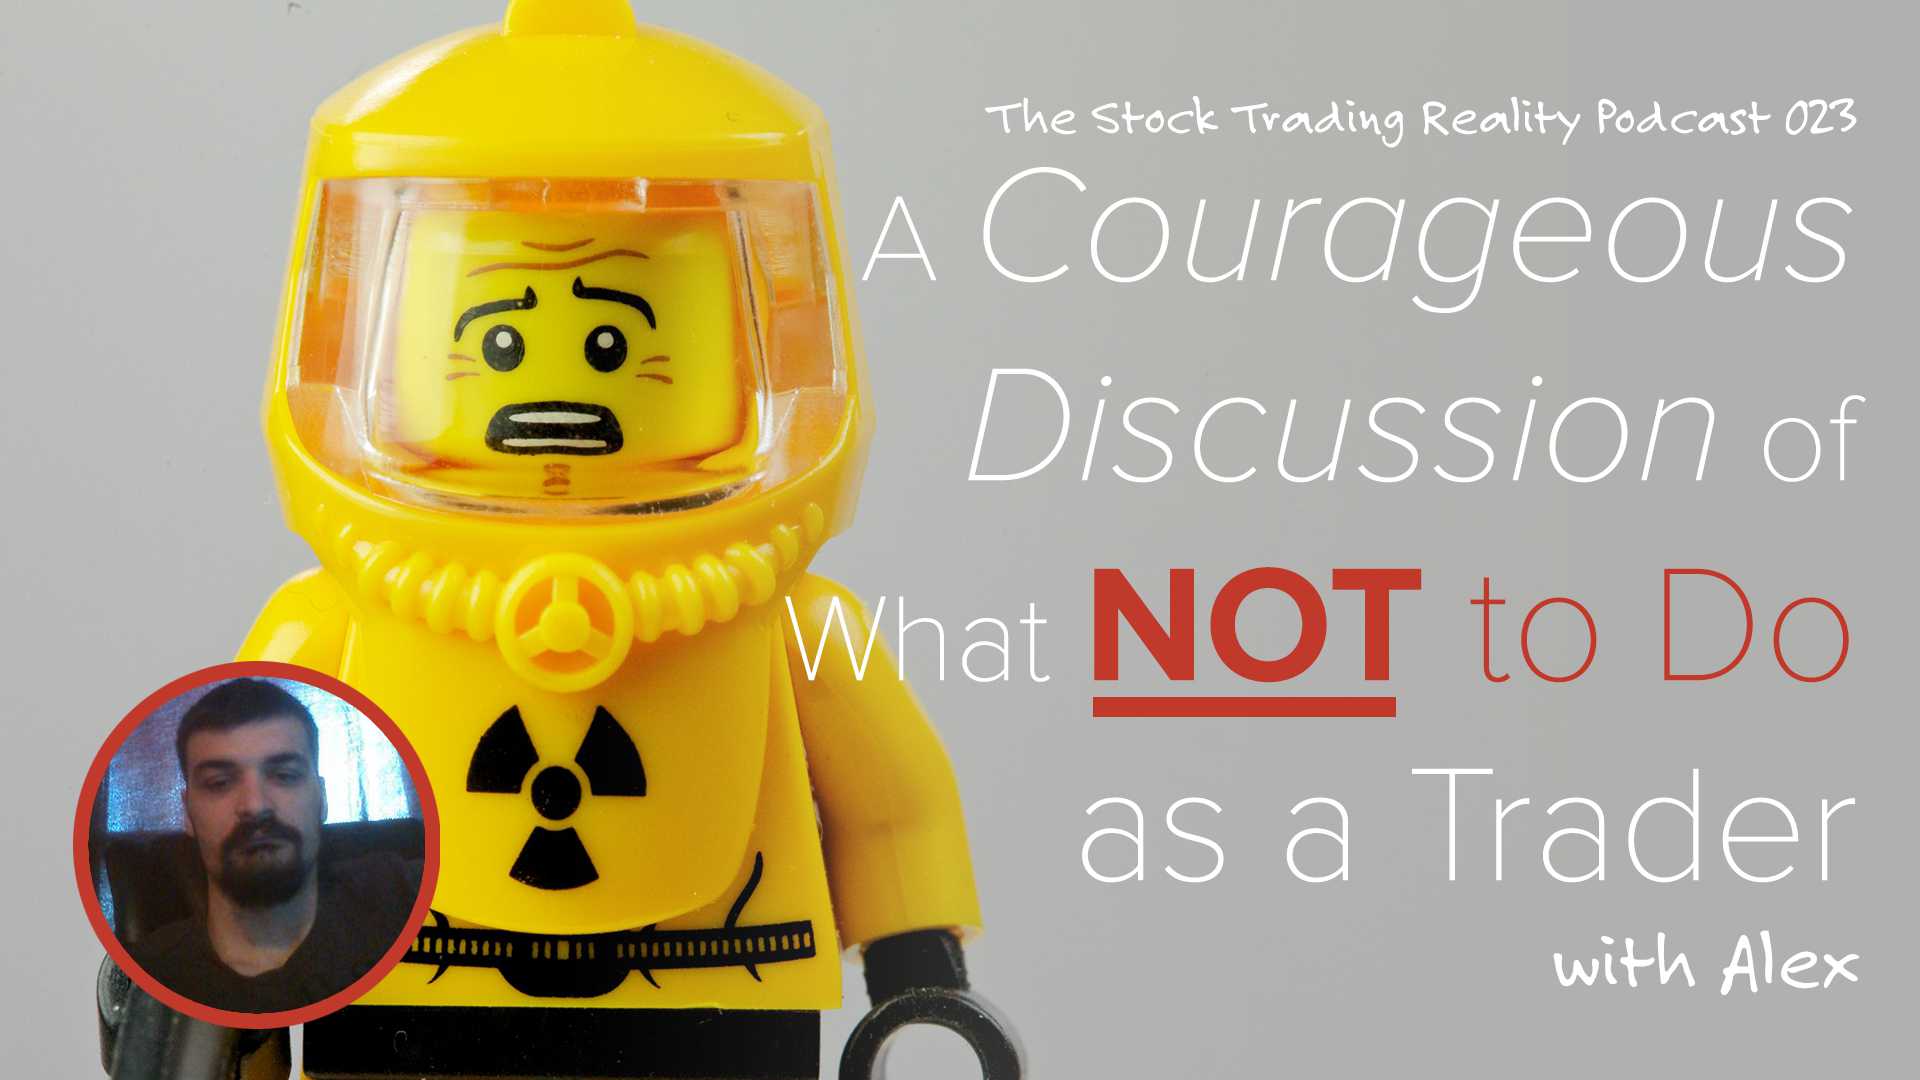 STR 023: A Courageous Discussion of What NOT to Do as a Trader